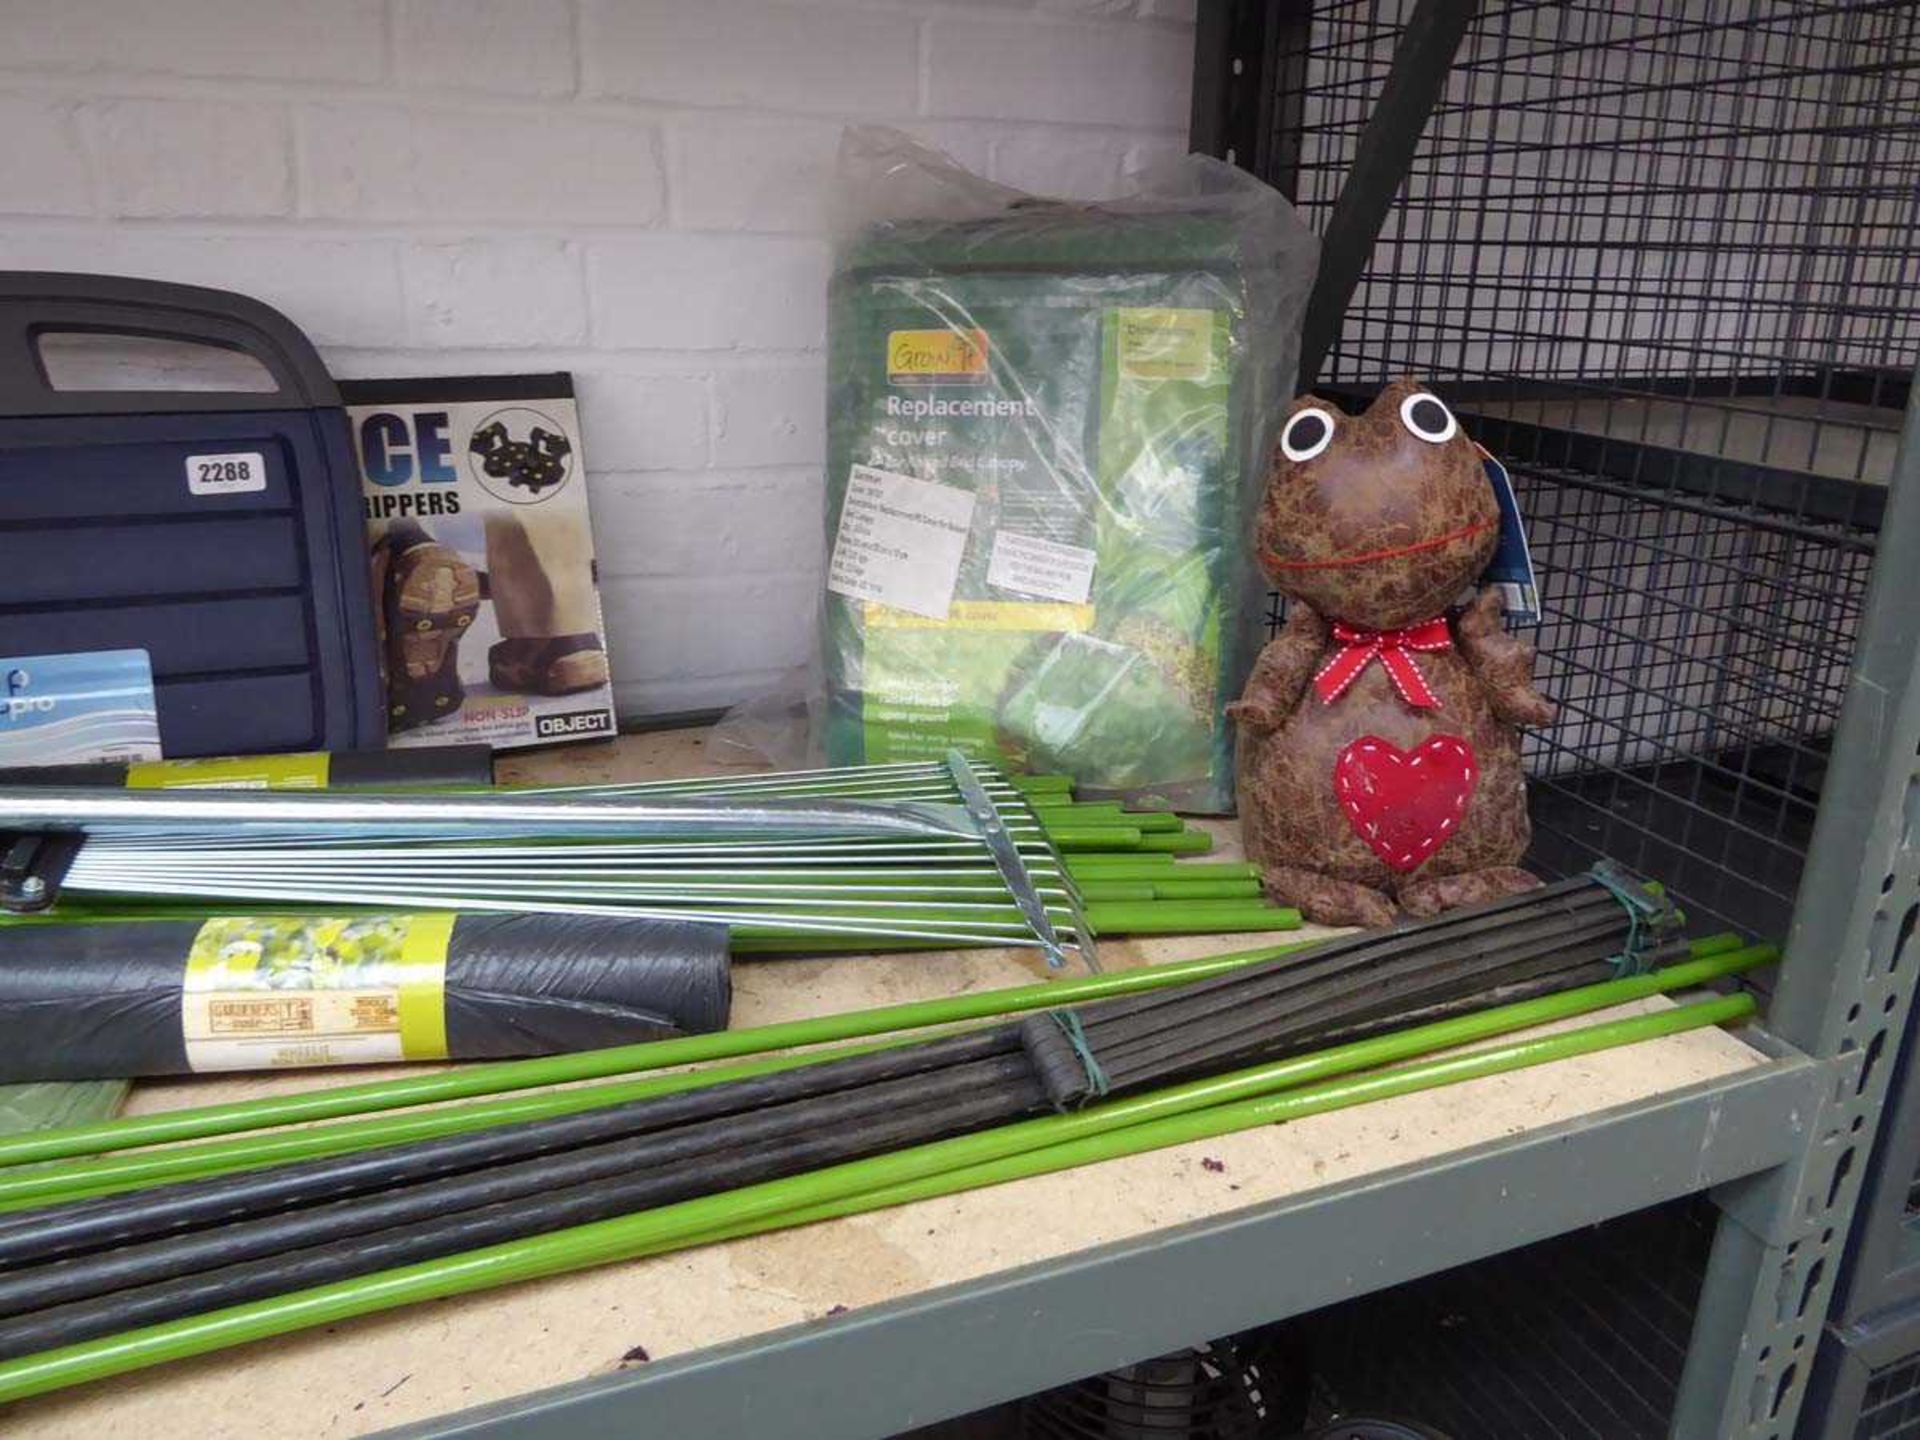 2 bays of mixed gardening related items incl. weed control fabric, tomato plant support frames, - Image 4 of 7